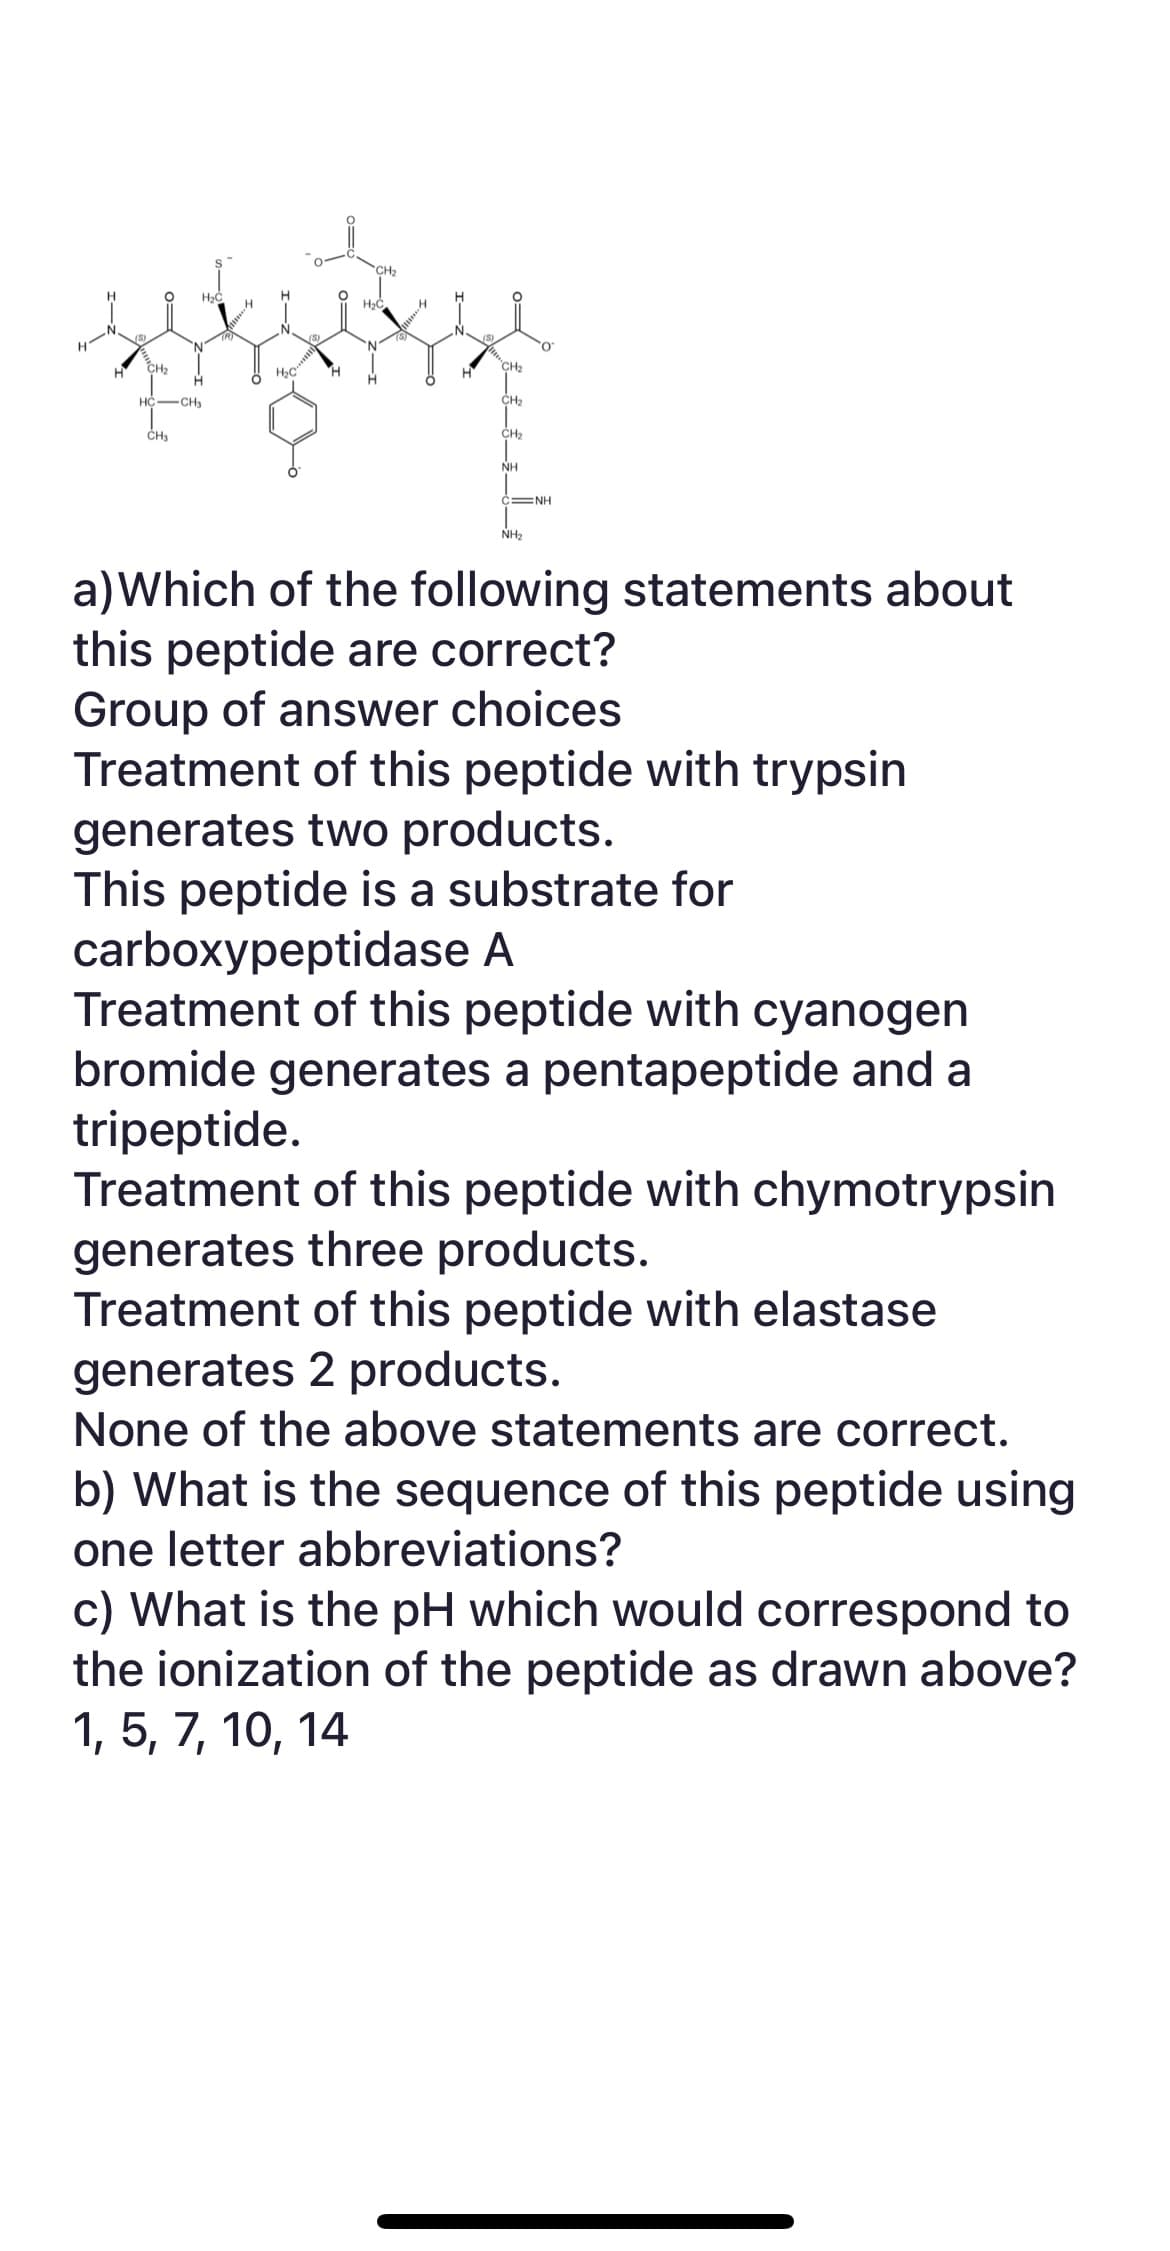 H
CH₂
H₂C
HC-CH3
CH₂
H
H₂C
(S)
H₂C
H
CH₂
CH₂
CH₂
NH
O
C NH
NH₂
a) Which of the following statements about
this peptide are correct?
Group of answer choices
Treatment of this peptide with trypsin
generates two products.
This peptide is a substrate for
carboxypeptidase A
Treatment of this peptide with cyanogen
bromide generates a pentapeptide and a
tripeptide.
Treatment of this peptide with chymotrypsin
generates three products.
Treatment of this peptide with elastase
generates 2 products.
None of the above statements are correct.
b) What is the sequence of this peptide using
one letter abbreviations?
c) What is the pH which would correspond to
the ionization of the peptide as drawn above?
1, 5, 7, 10, 14